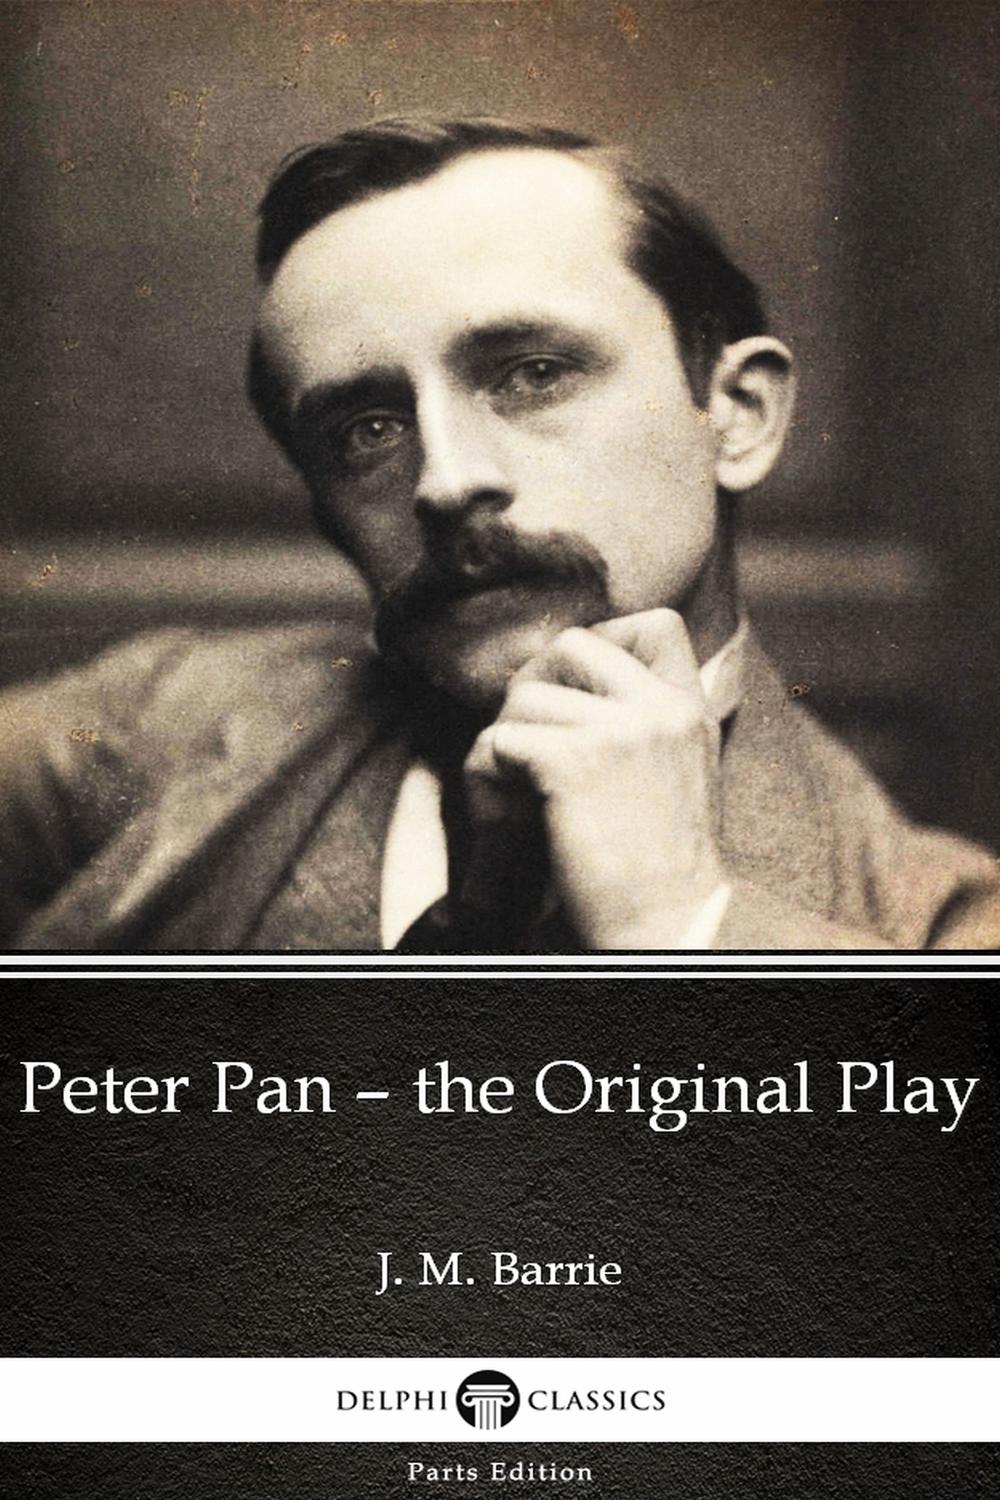 Peter Pan – the Original Play by J. M. Barrie - Delphi Classics (Illustrated) - J. M. Barrie